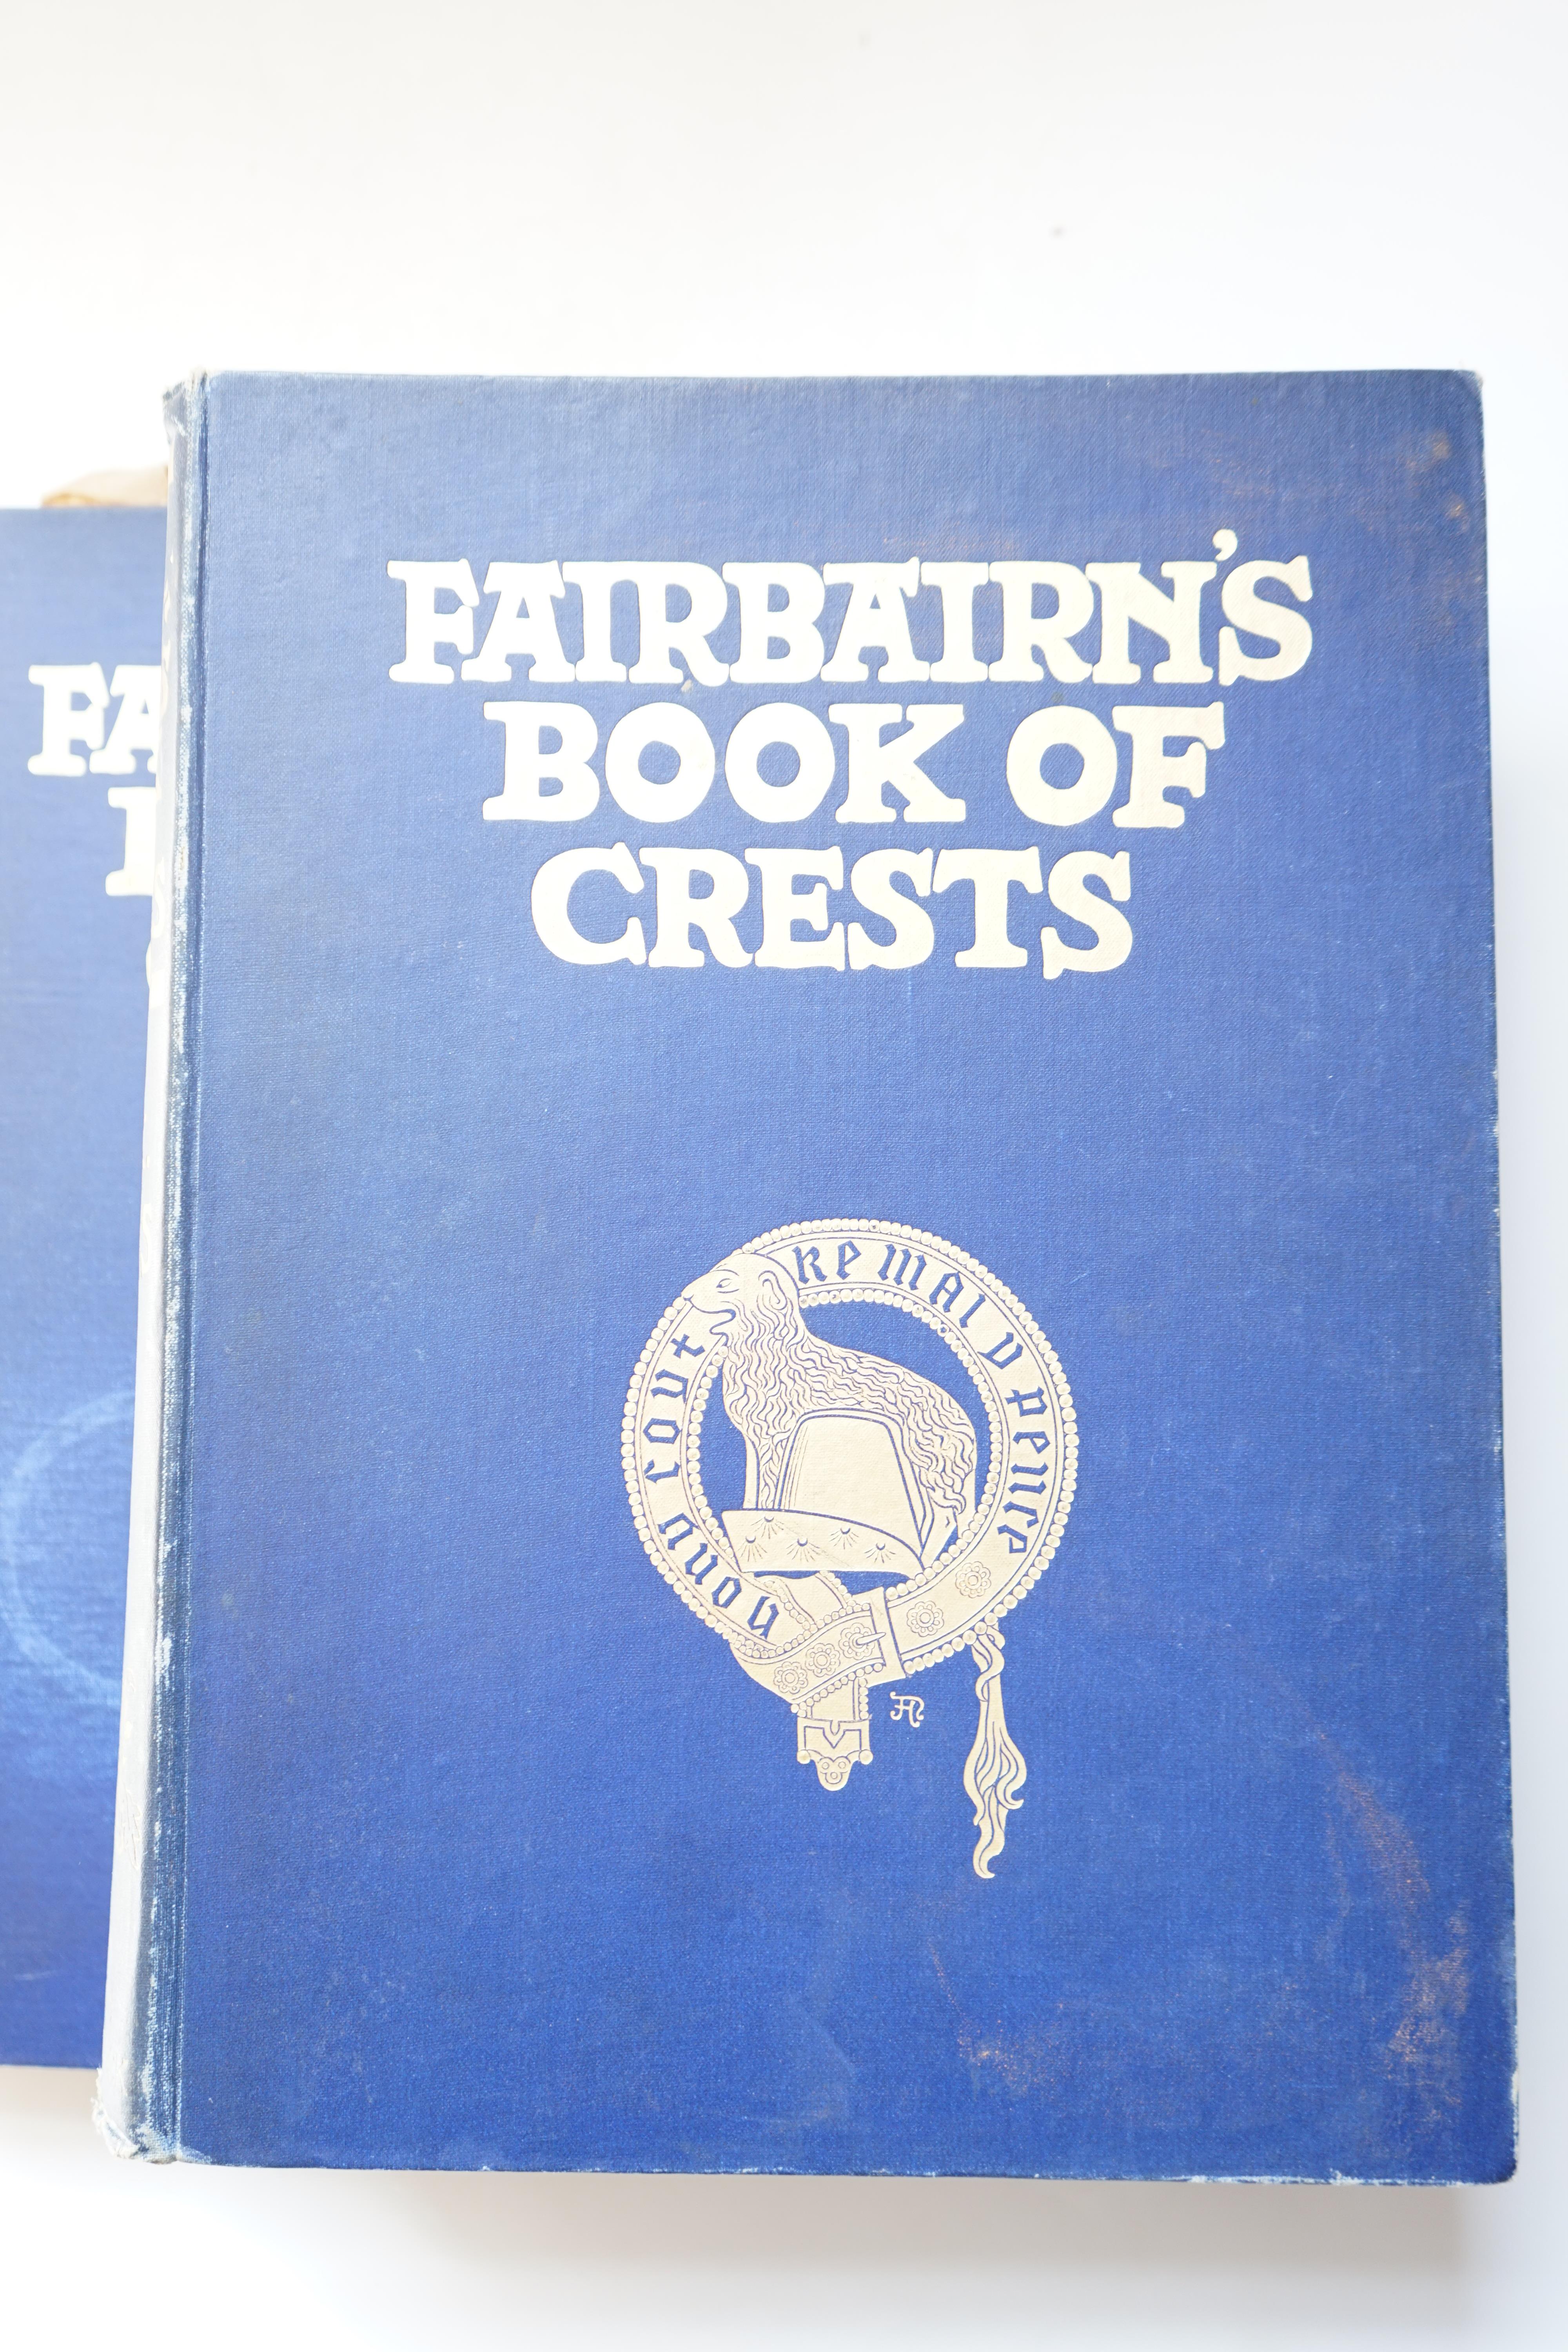 Fairbairn, James - Fairbairn’s Book of Crests of the Families of Great Britain and Ireland, 4th edition, 2 vols. 4to, blue cloth gilt, with 314 plates, T.C & E.C. Jack, London, 1905.